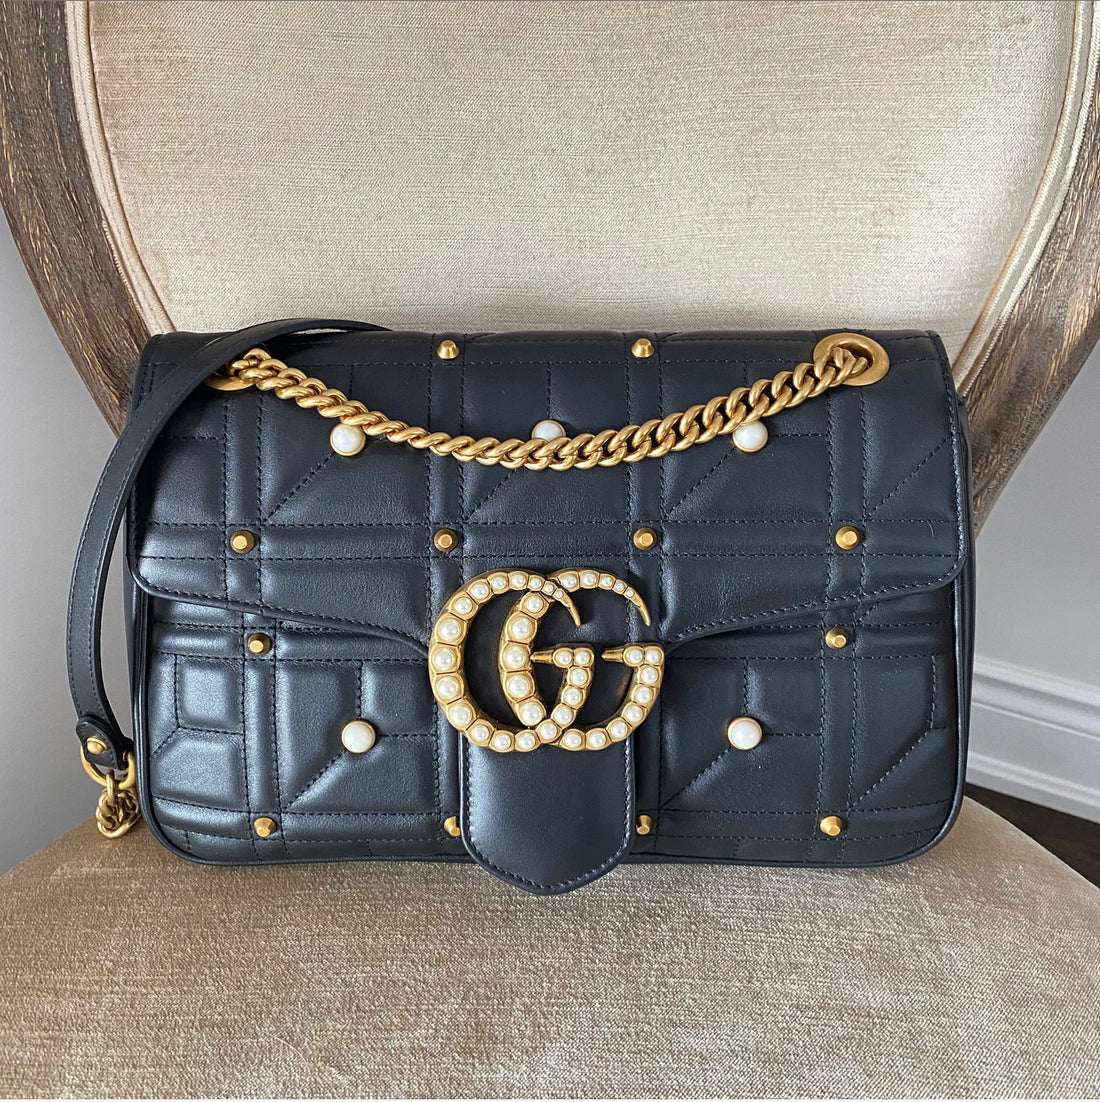 gucci marmont pearl bag